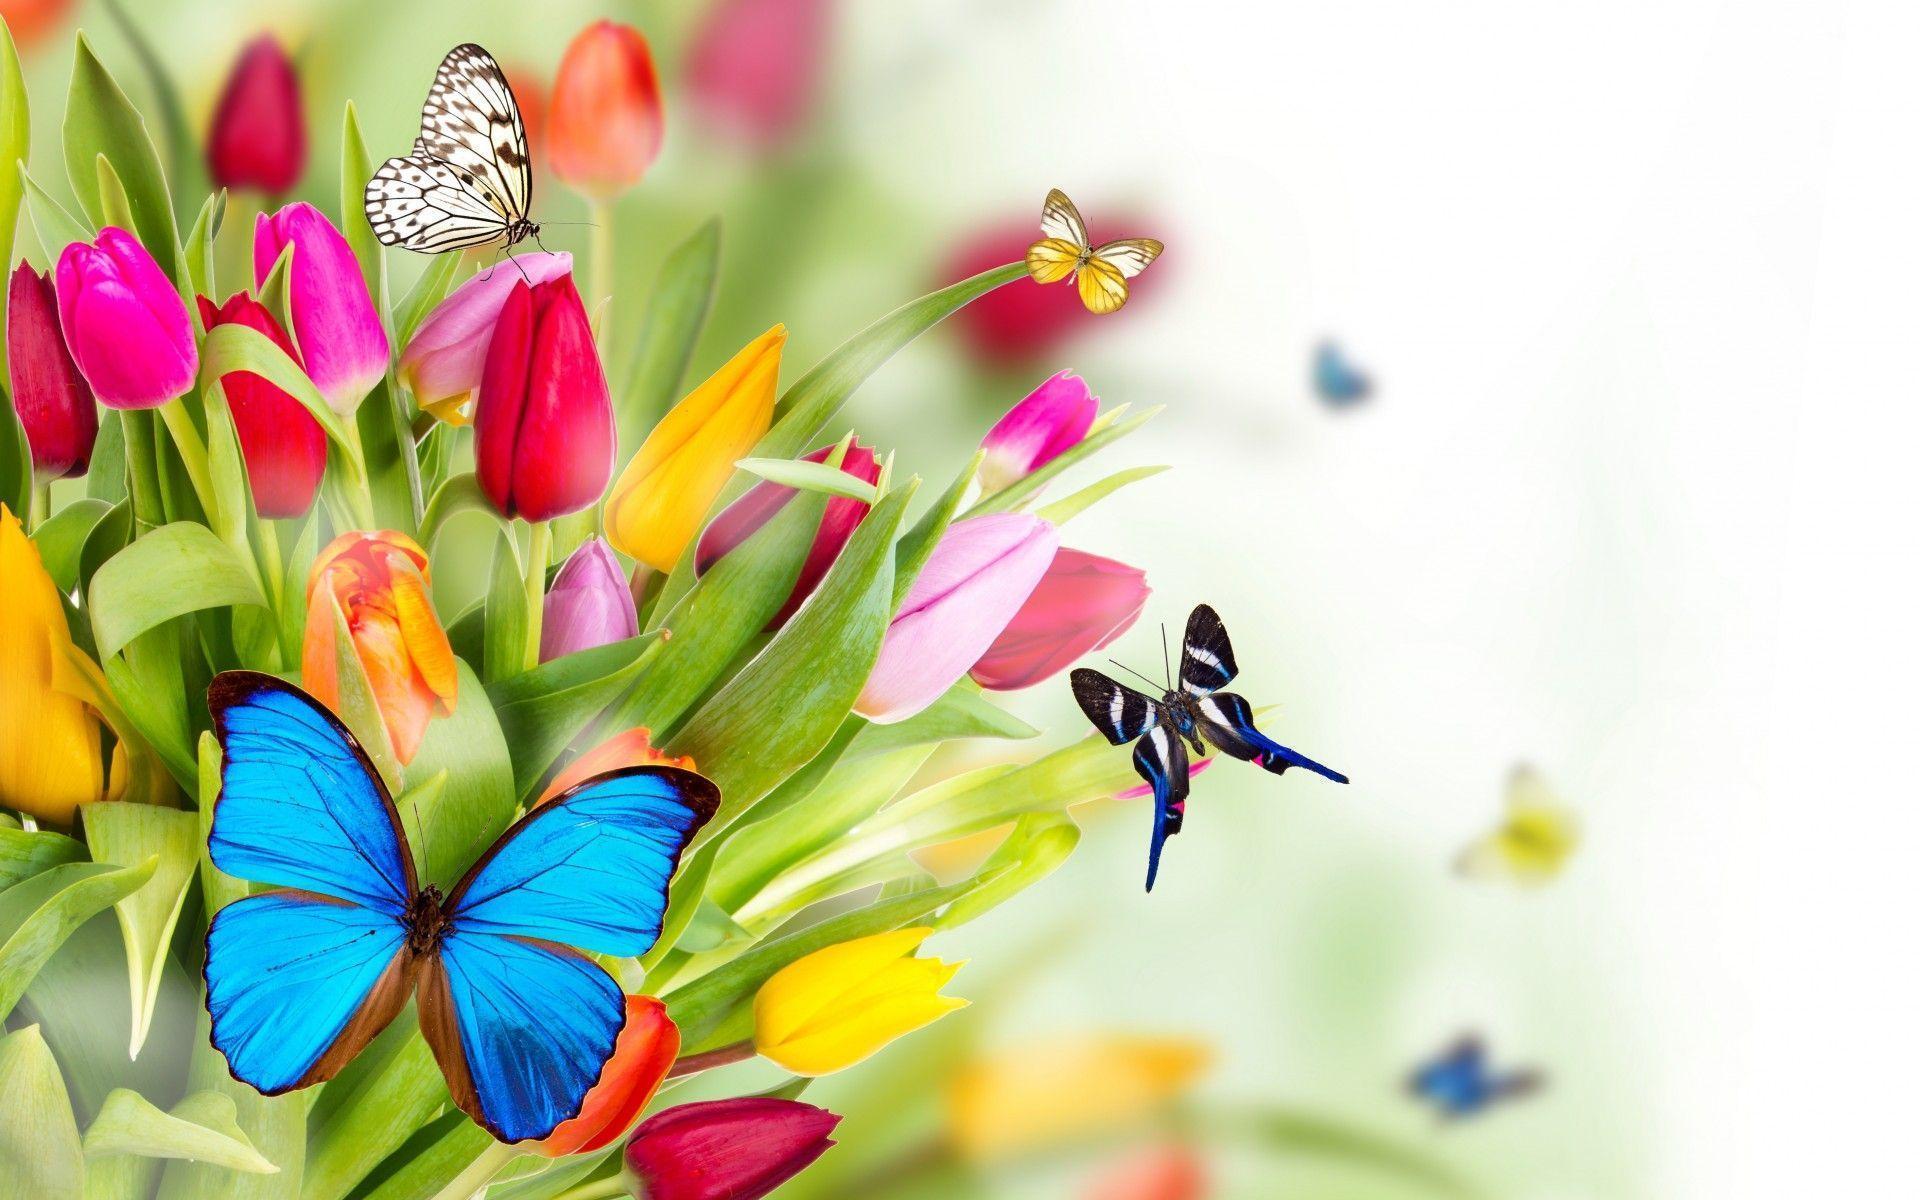 Spring Flowers And Butterflies Background HD Image 3 HD